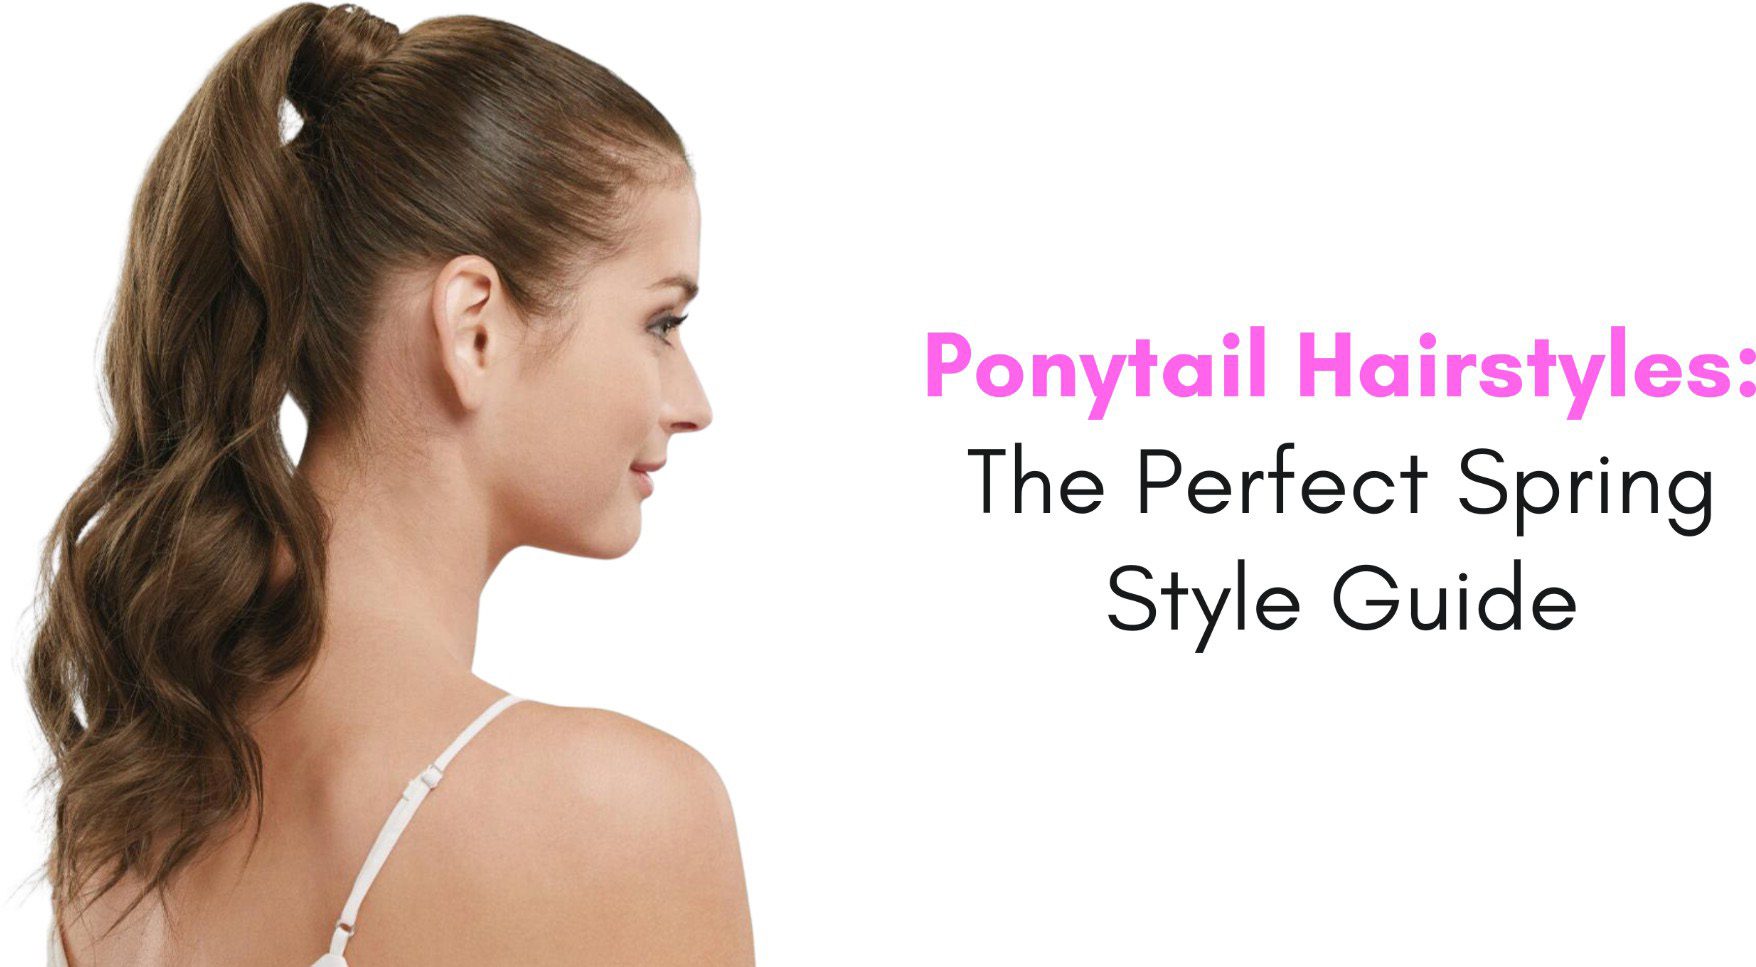 Ponytail Hairstyles: The Perfect Spring Style Guide